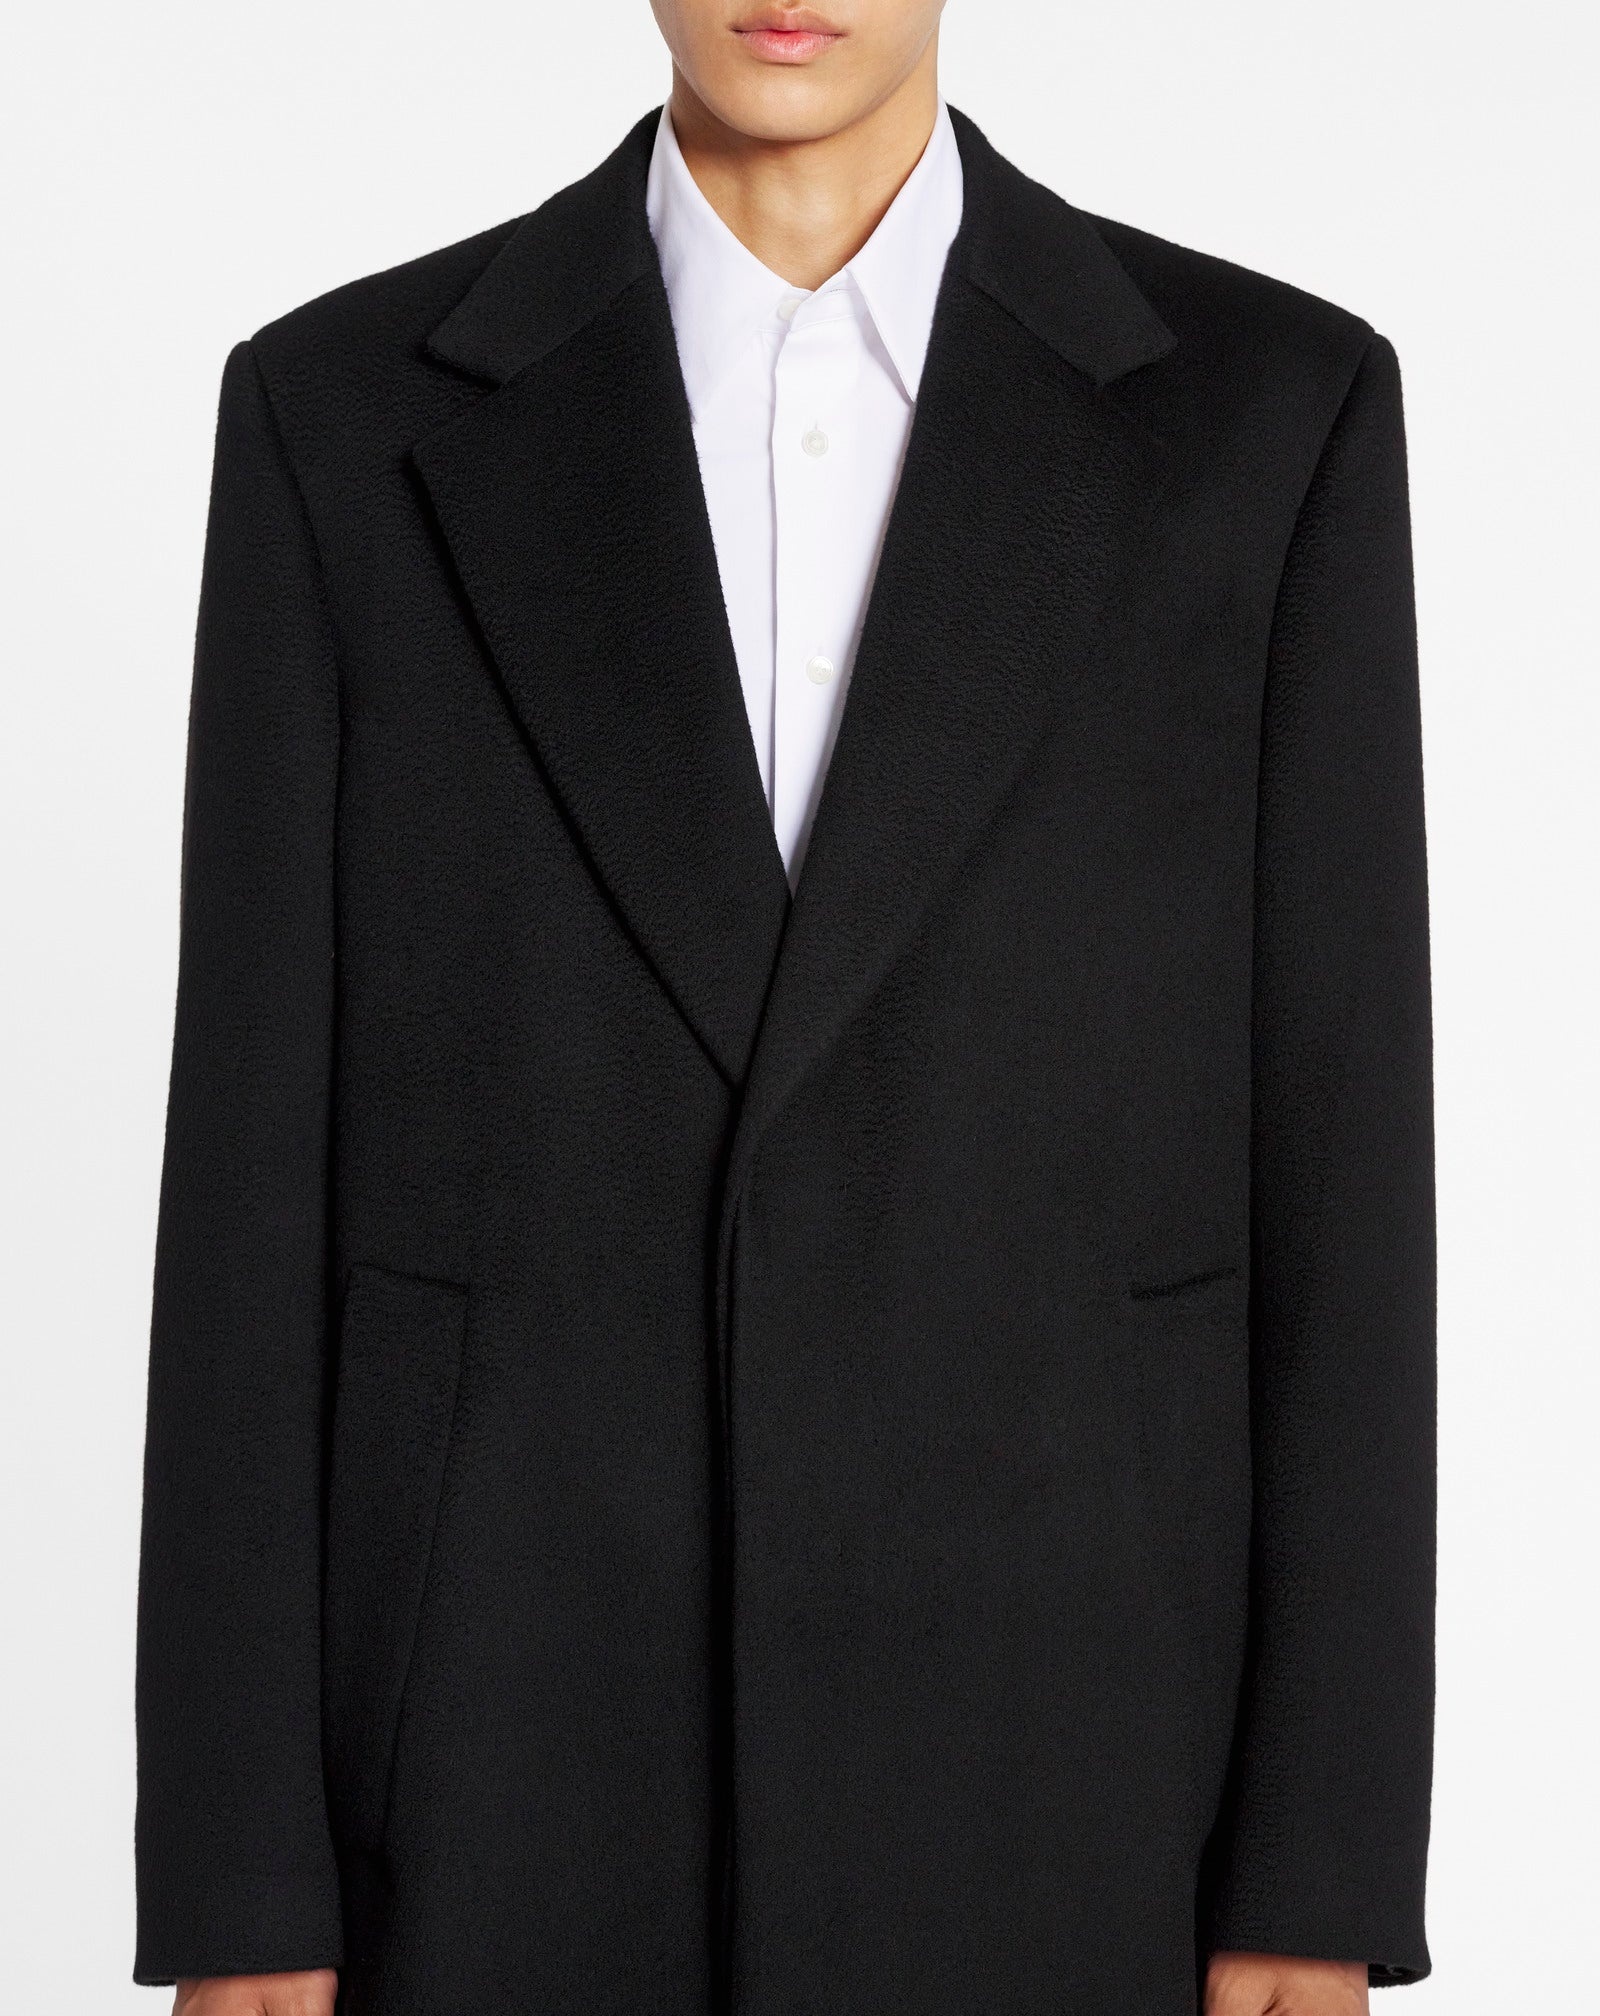 SARTORIAL TAILORED COAT IN DOUBLE FACE CASHMERE - 5